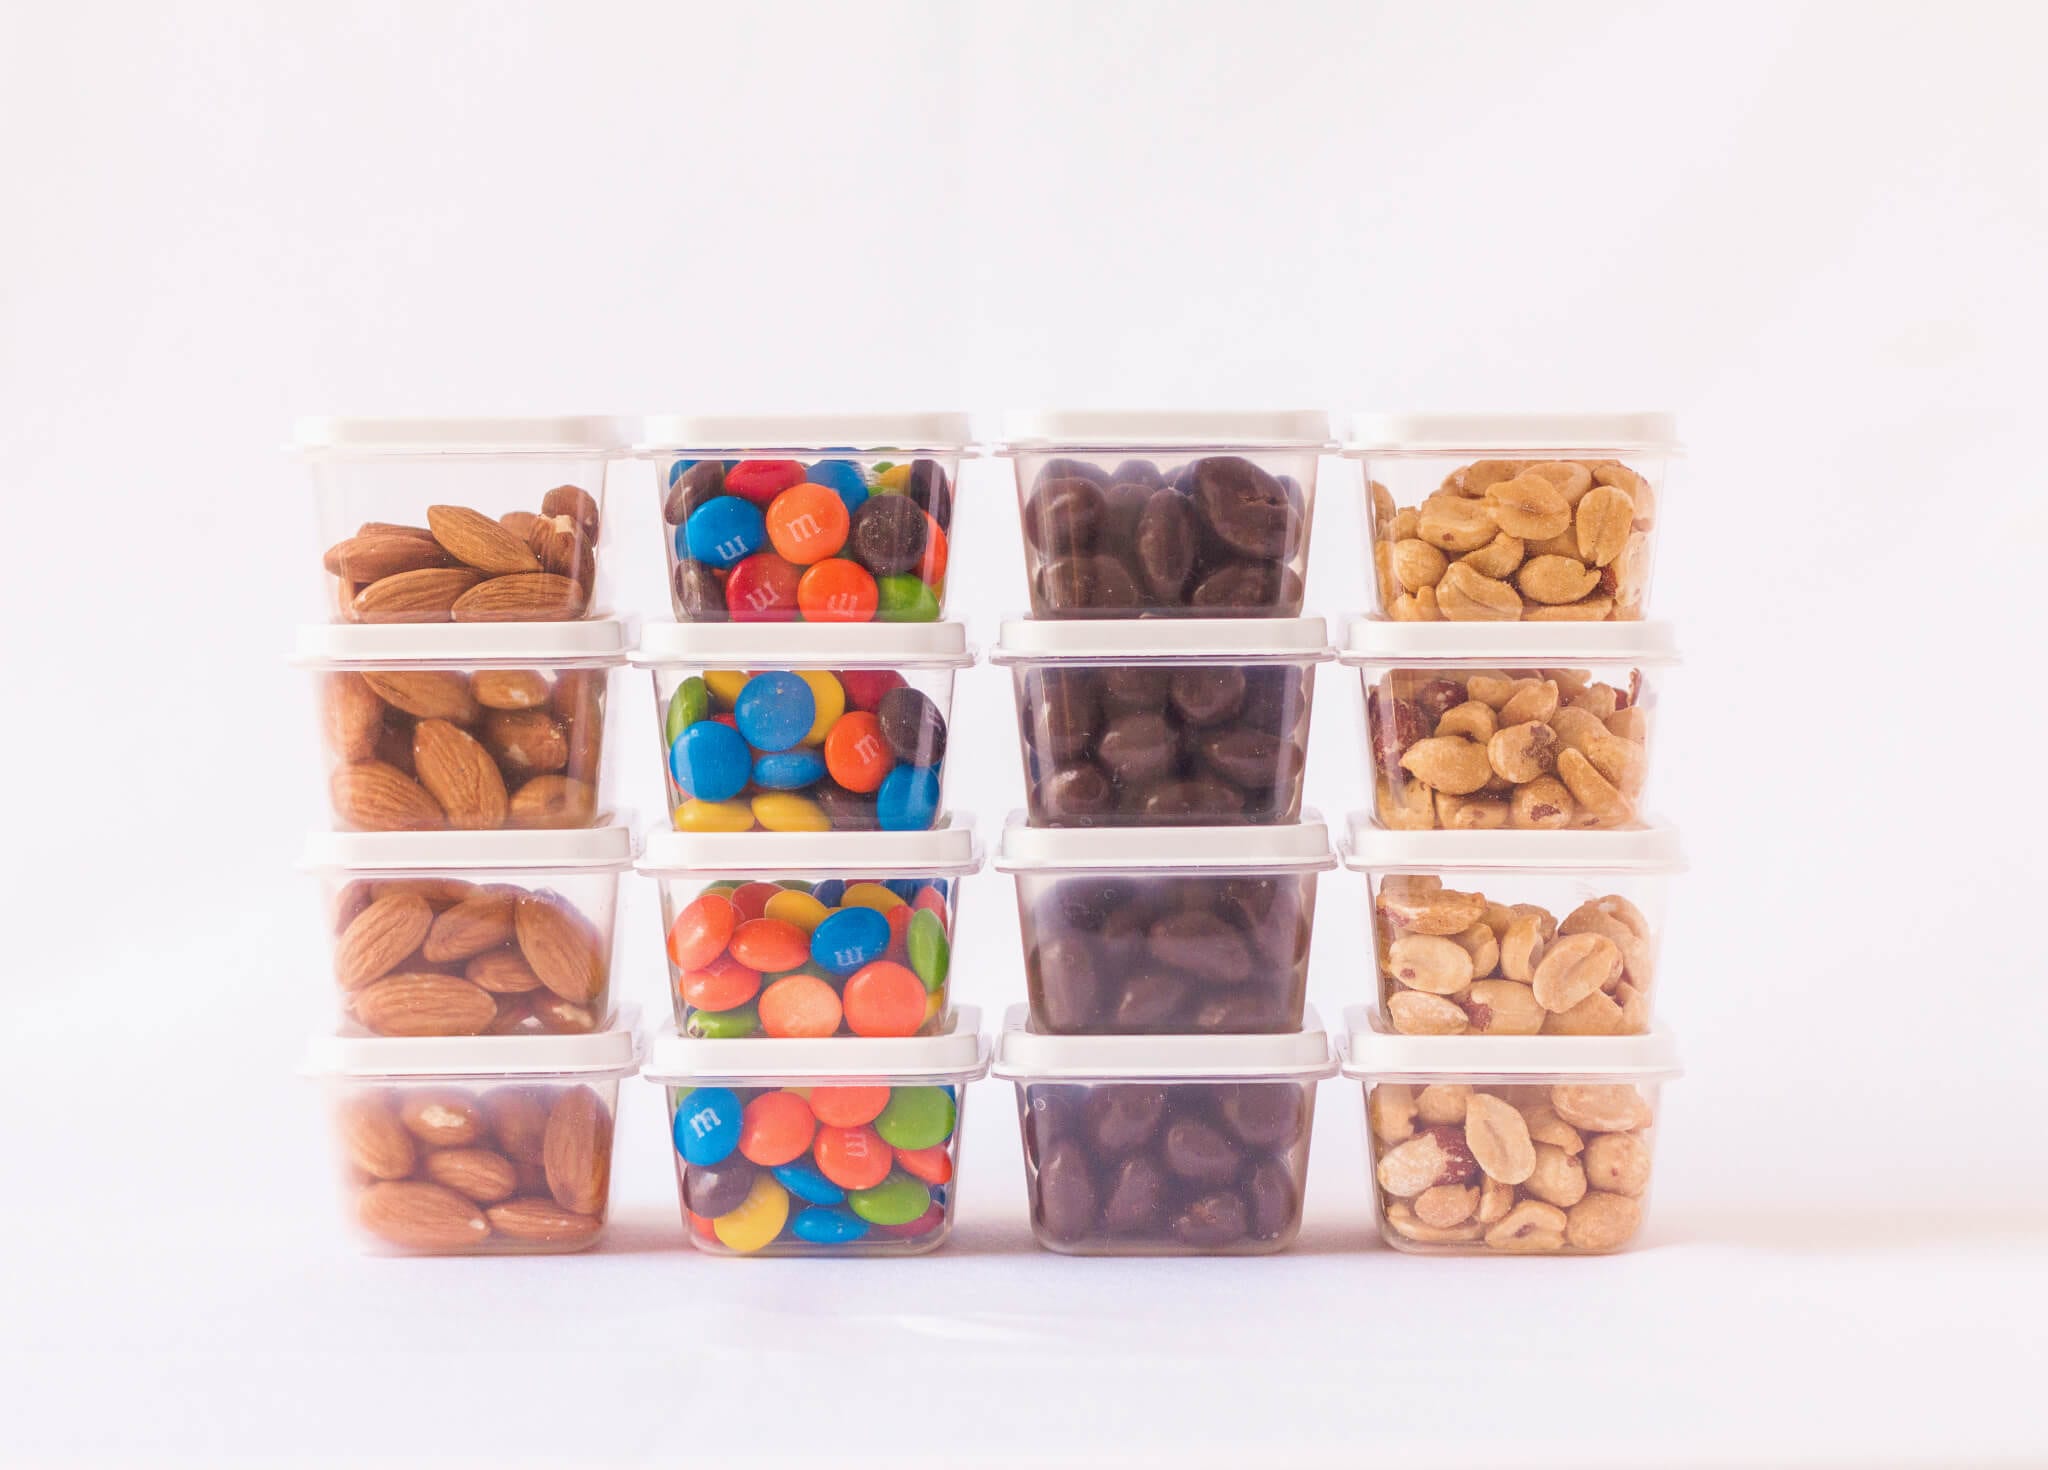 How to store Healthy Snacks in the Pantry